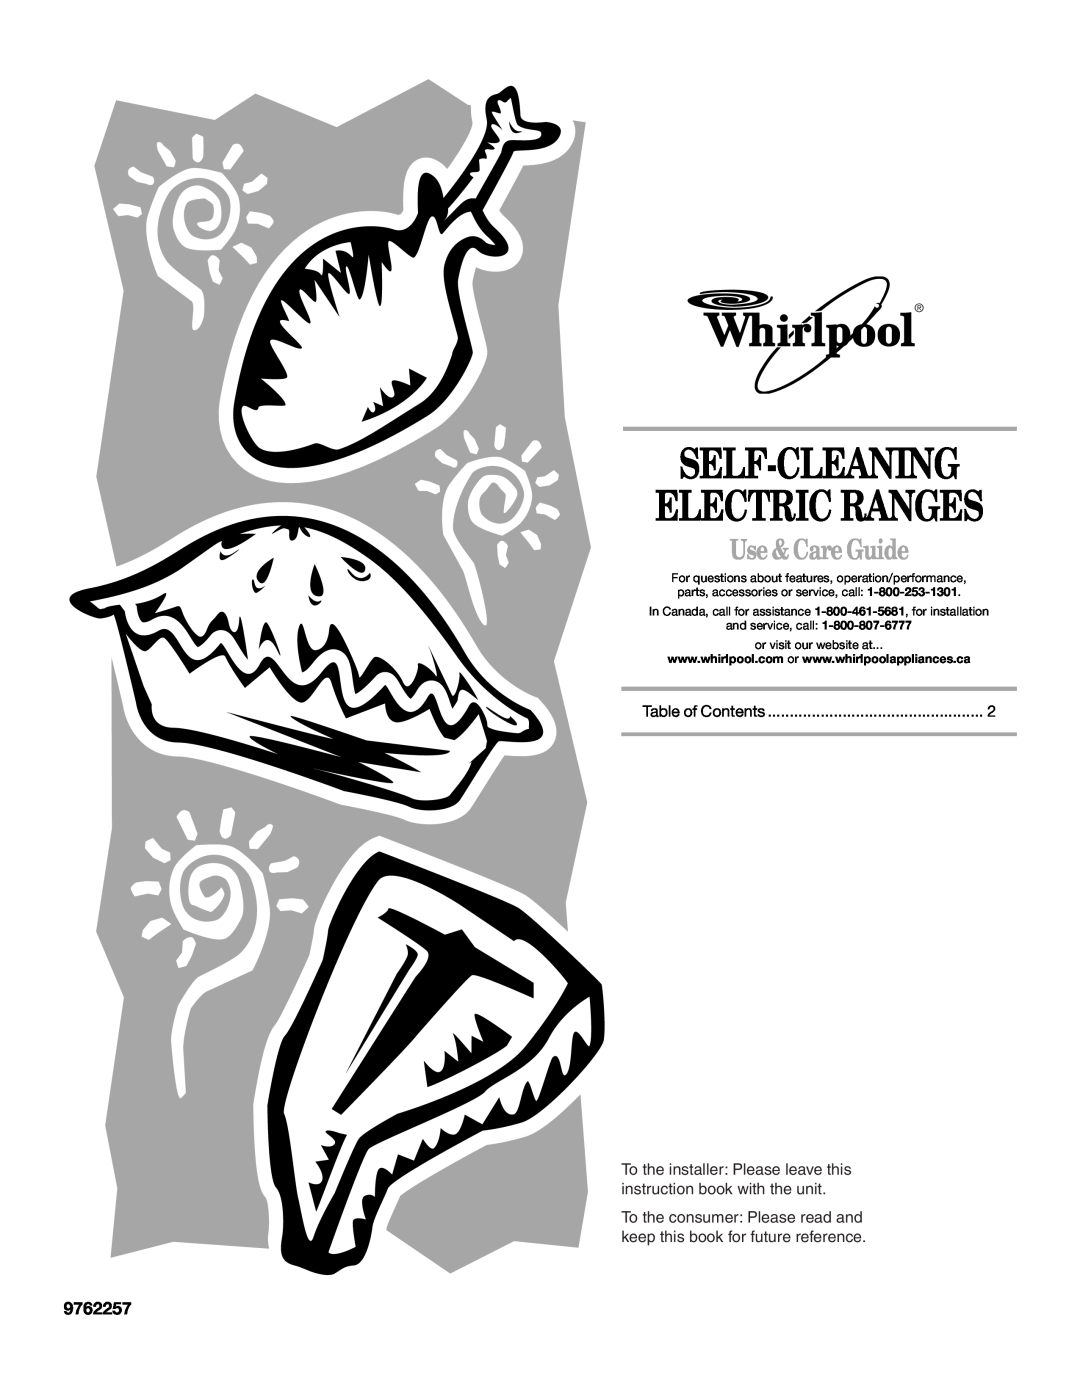 Whirlpool 9762257 manual Self-Cleaning Electric Ranges, Use & Care Guide, and service, call or visit our website at 